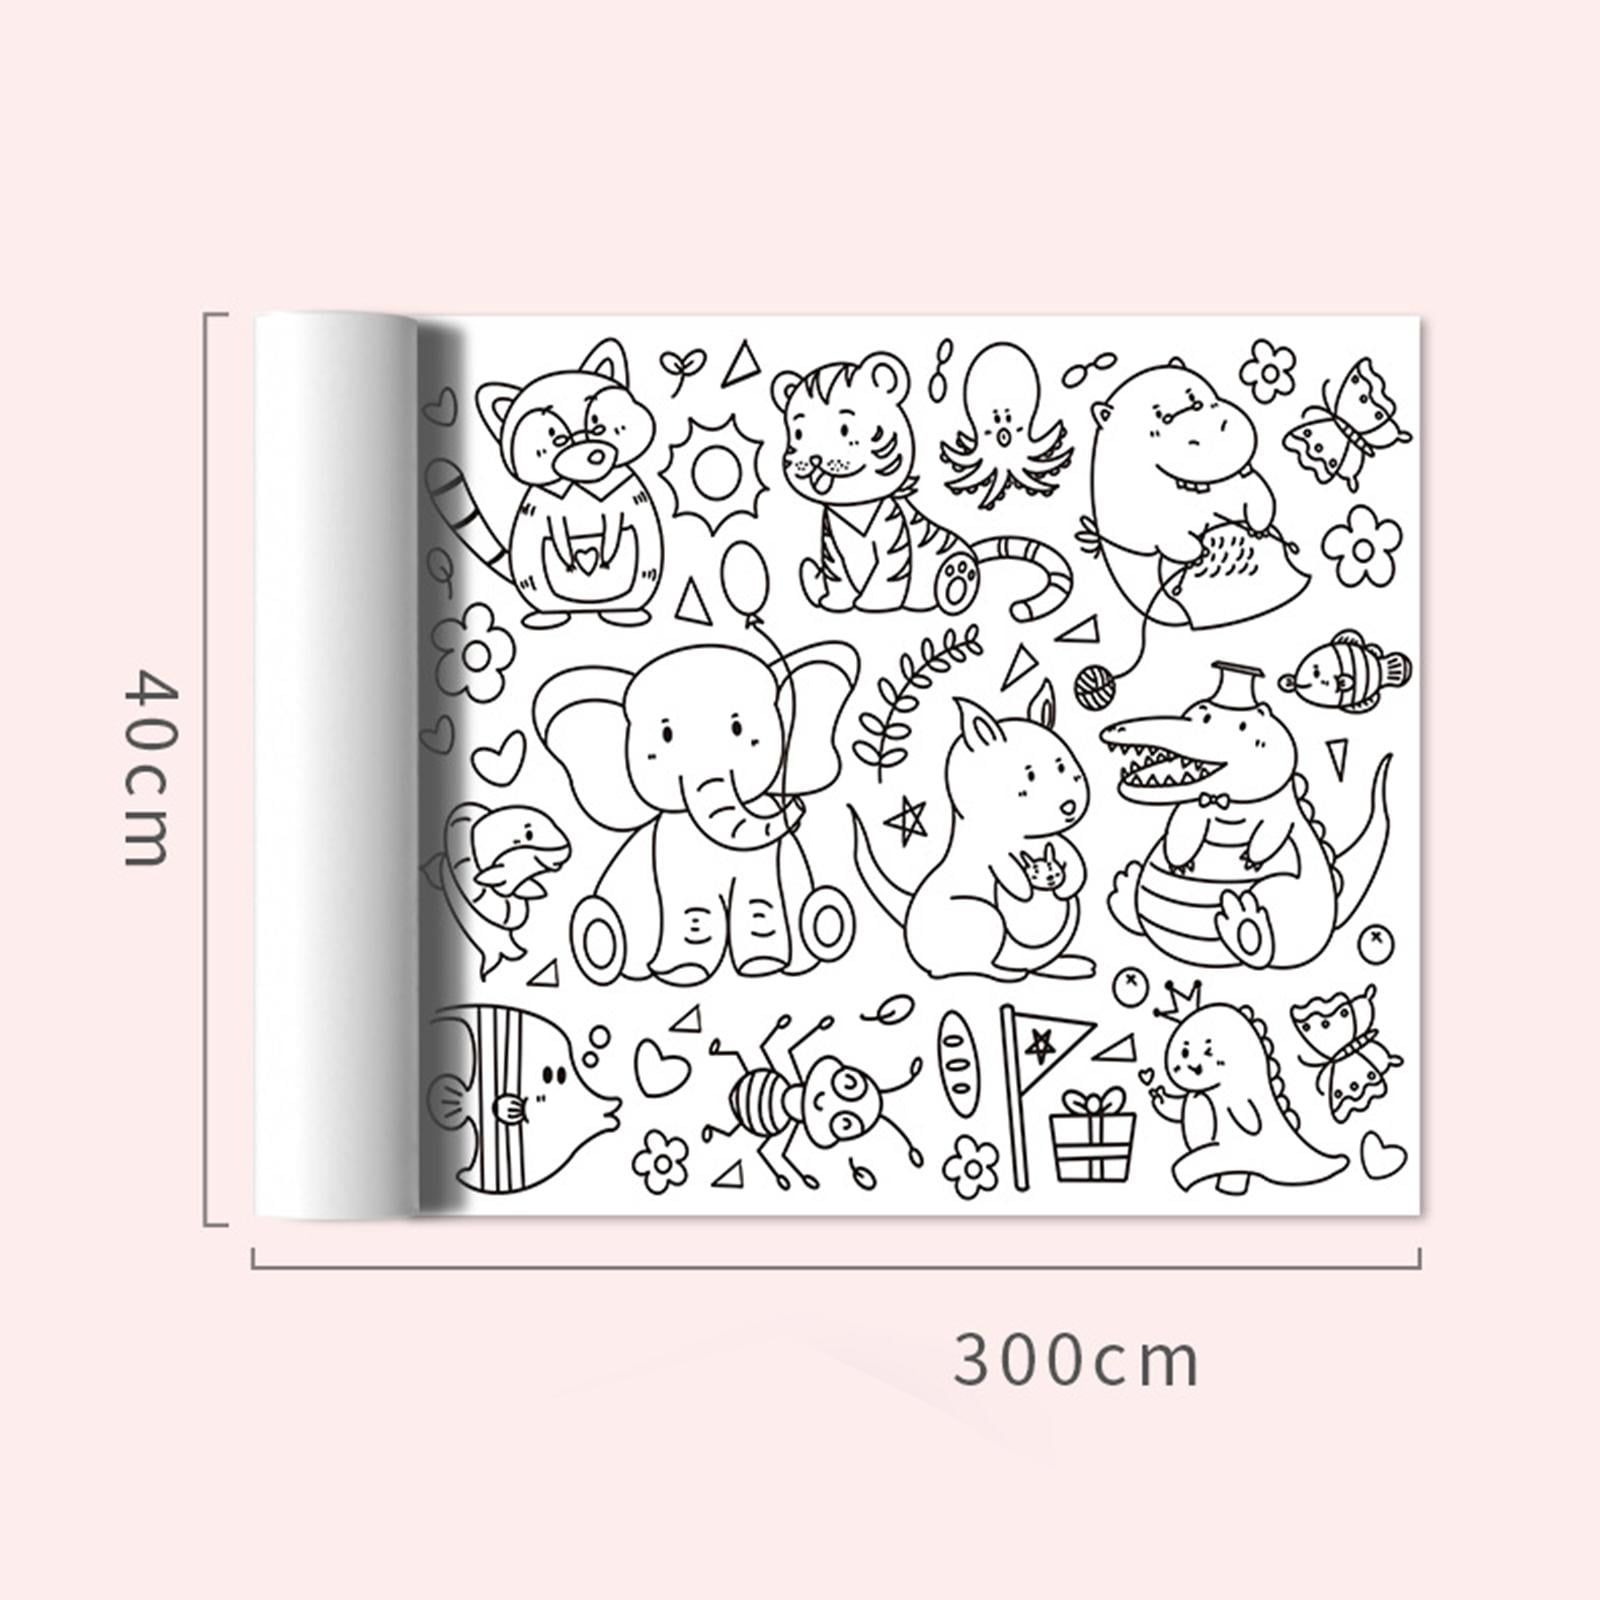  Outlets Children's Drawing Roll,3M Drawing Paper, Painting Paper  for Kids, DIY Coloring Pages with Pattern, Tracing Paper for Drawing,  Re-Stick Art Paper Roll for Stickers, Arts & Crafts (Princess) : Arts